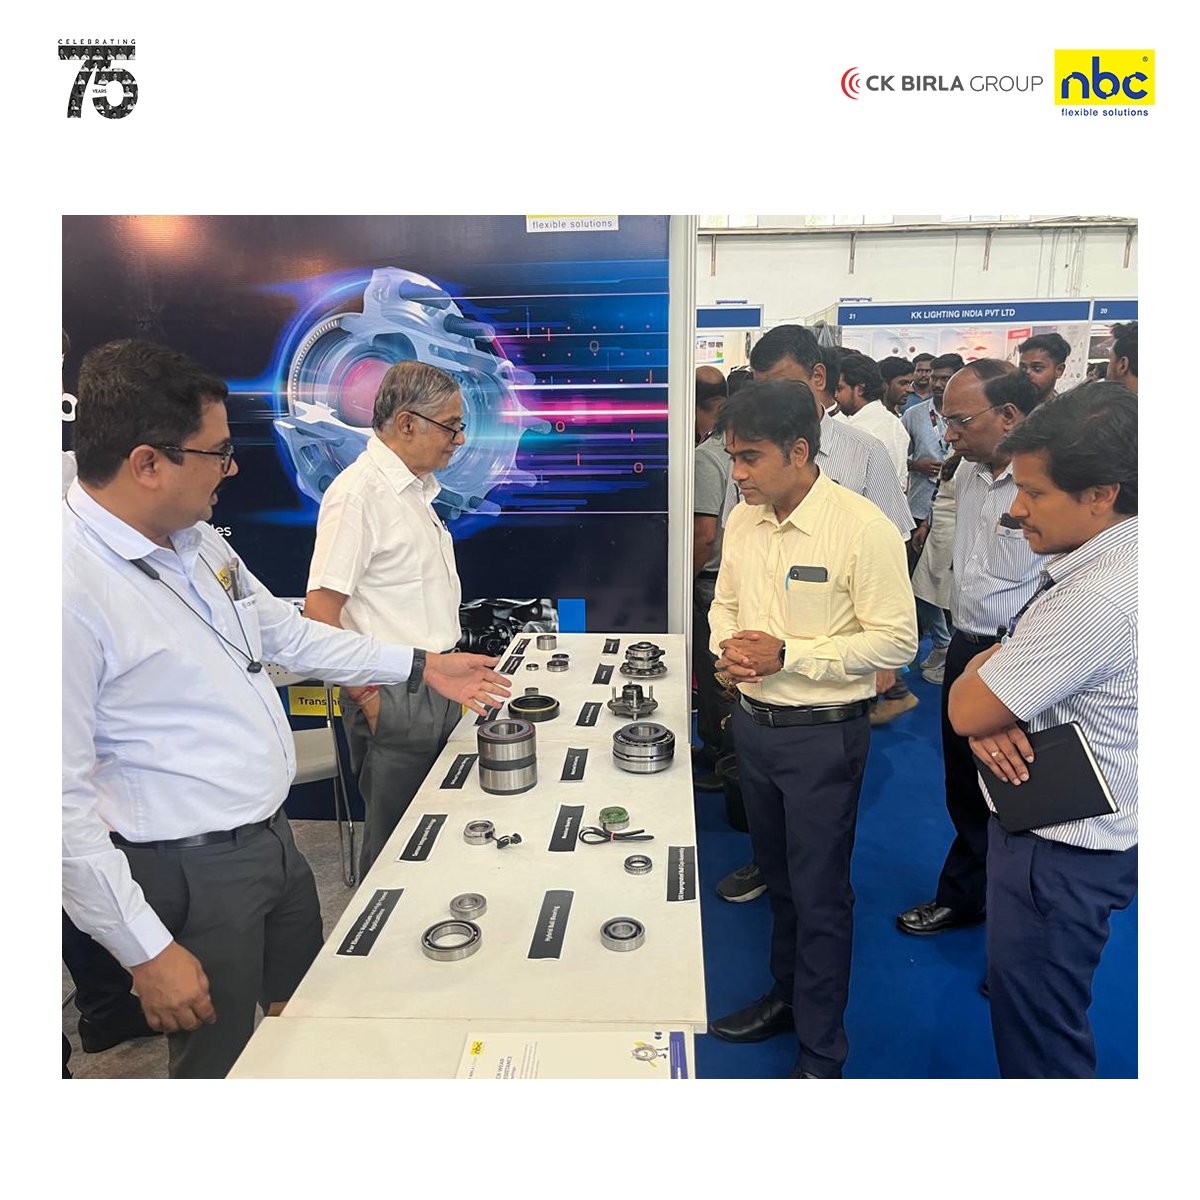 Accelerating towards the future of mobility at the ACMA – Ashok Leyland Future Mobility Expo: a hub for innovation, collaboration, and electrifying advancements in commercial and electric vehicles. 🚀#innovation #ashokleyland #bearings #explore #nbcbearings #ckbirlagroup #ev